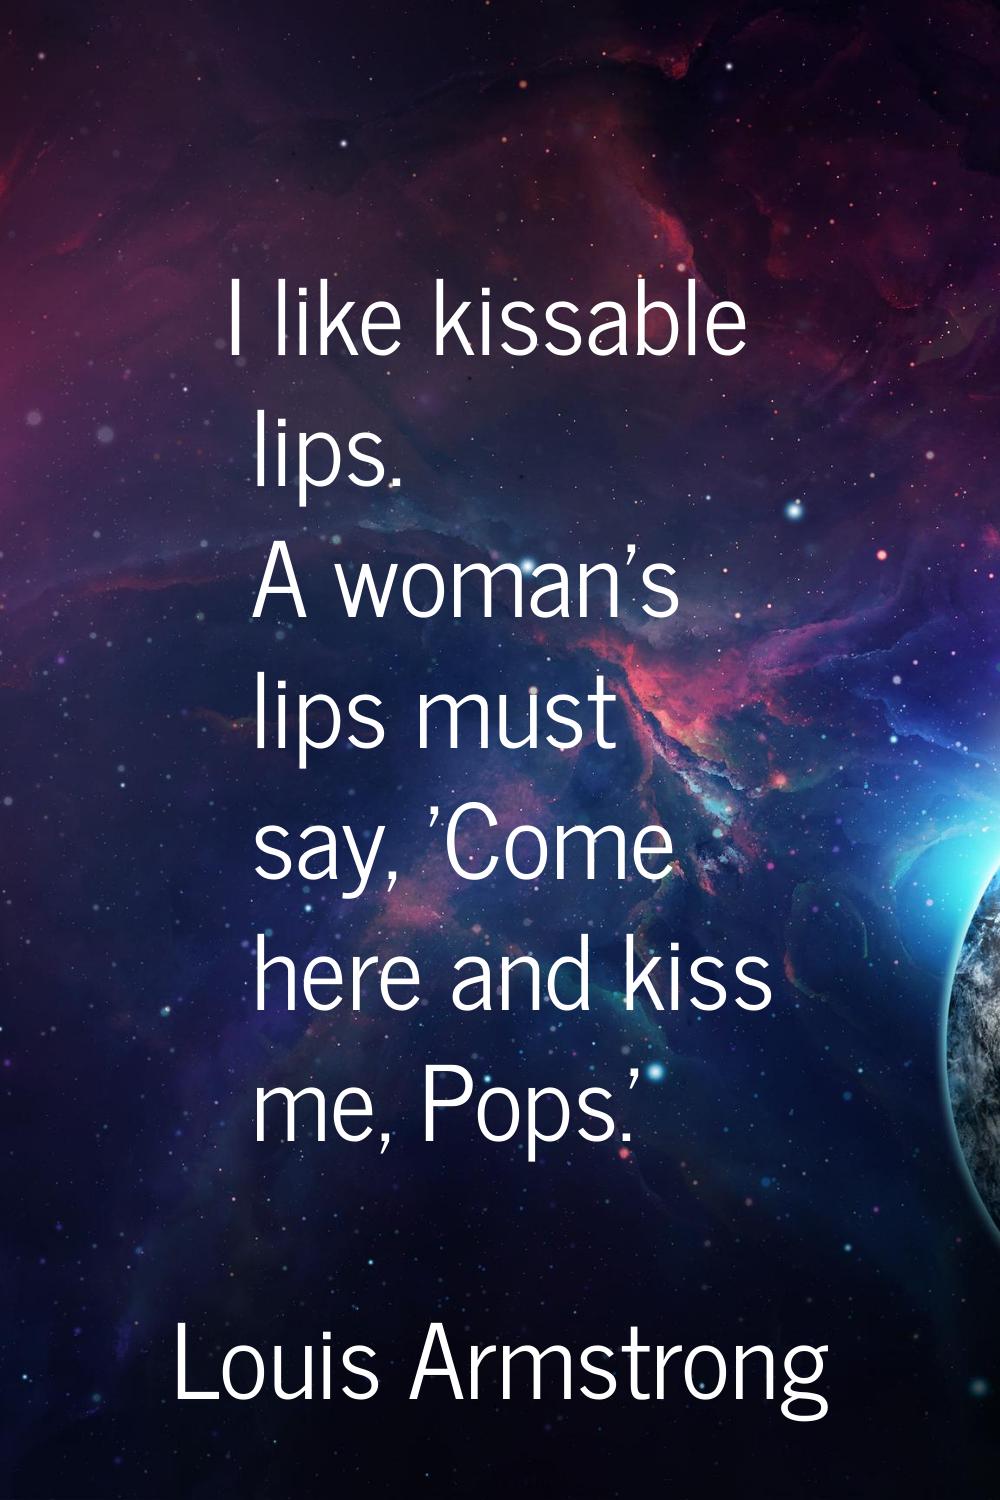 I like kissable lips. A woman's lips must say, 'Come here and kiss me, Pops.'